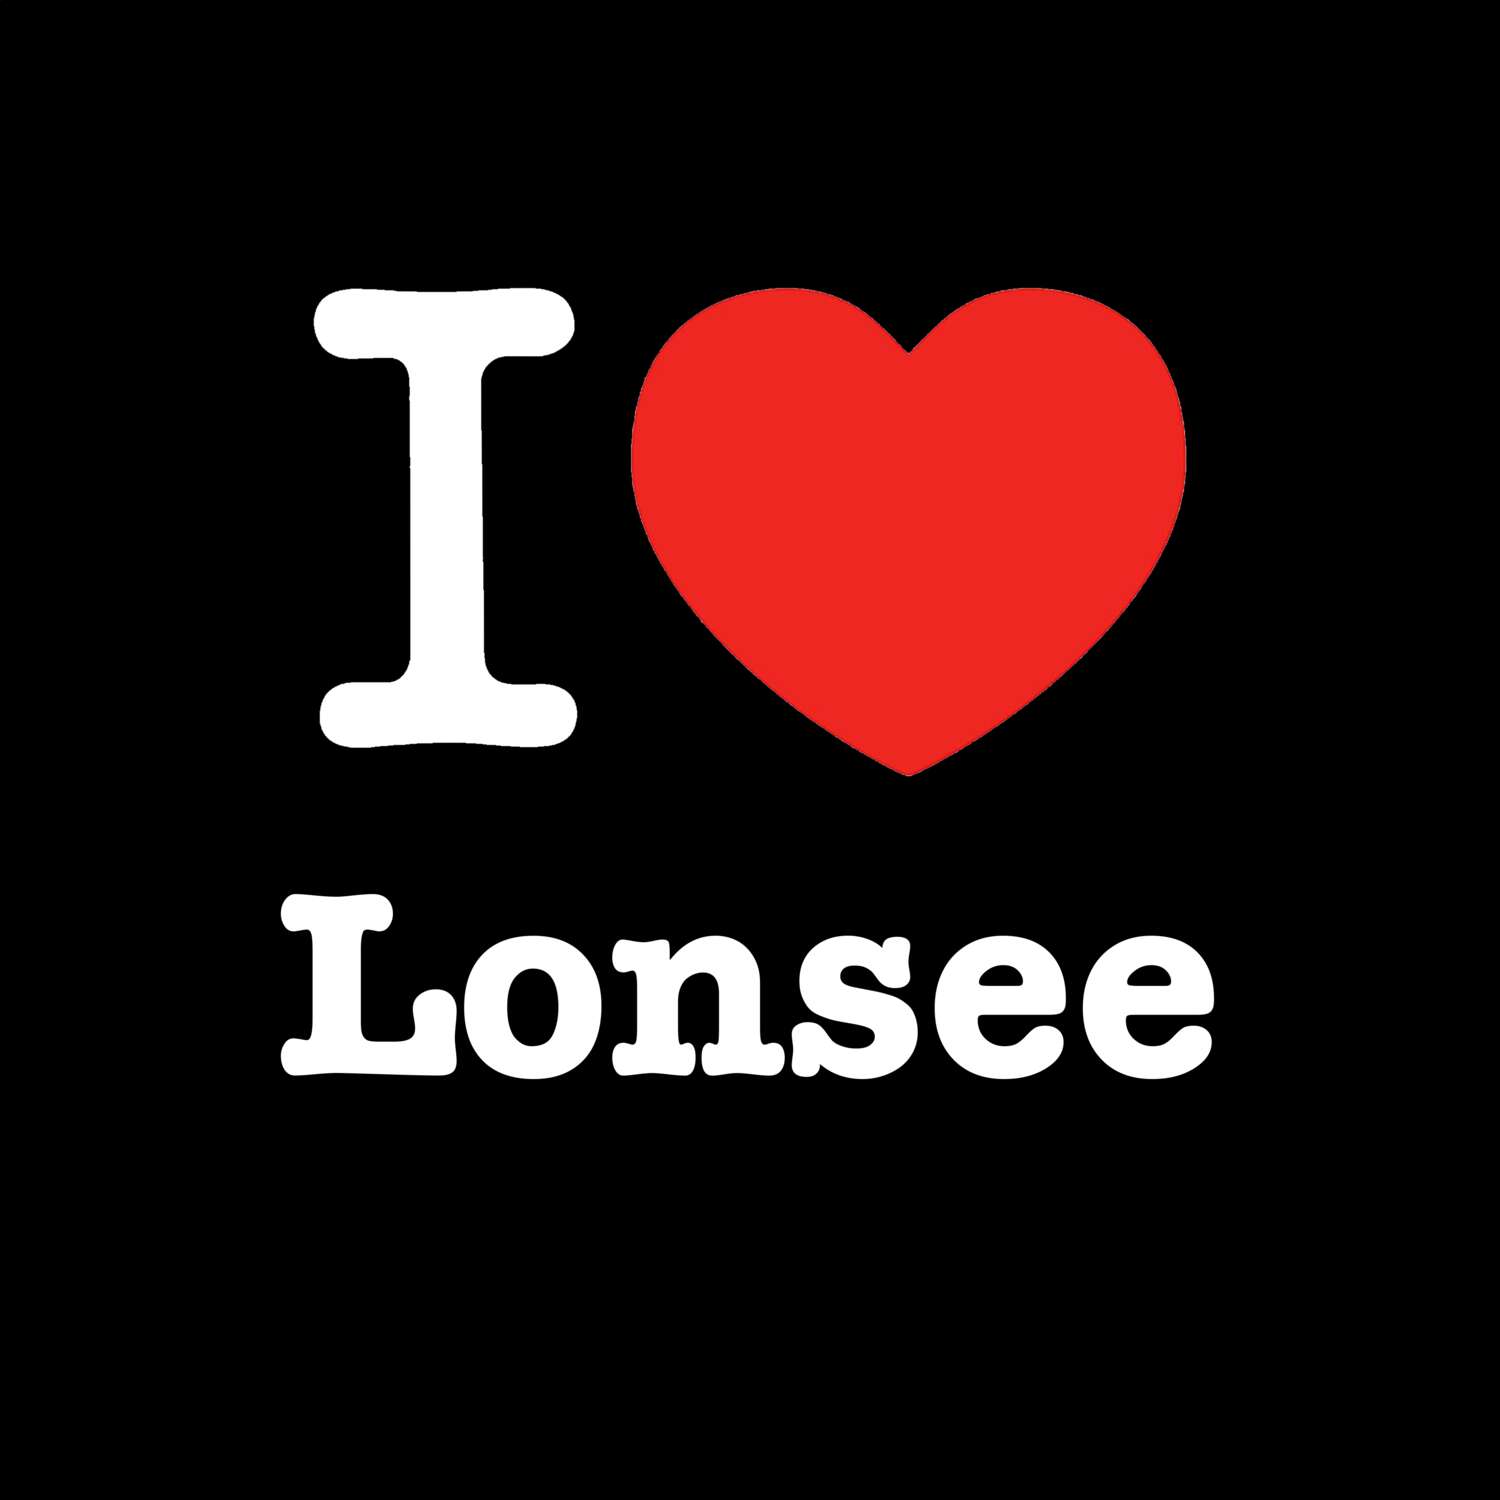 Lonsee T-Shirt »I love«